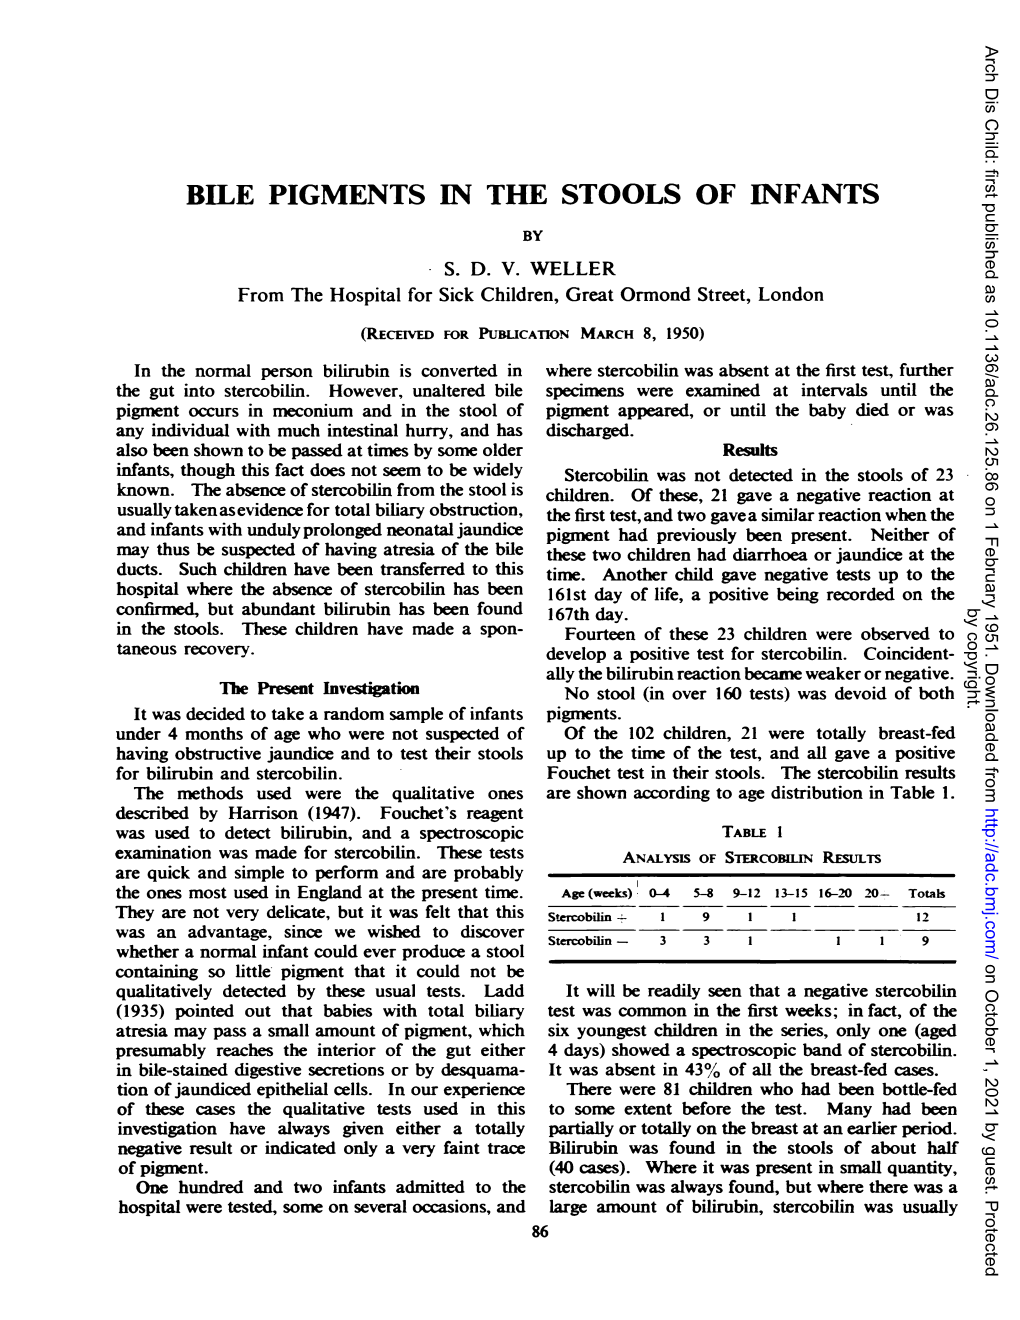 Bile Pigments in the Stools of Infants by - S